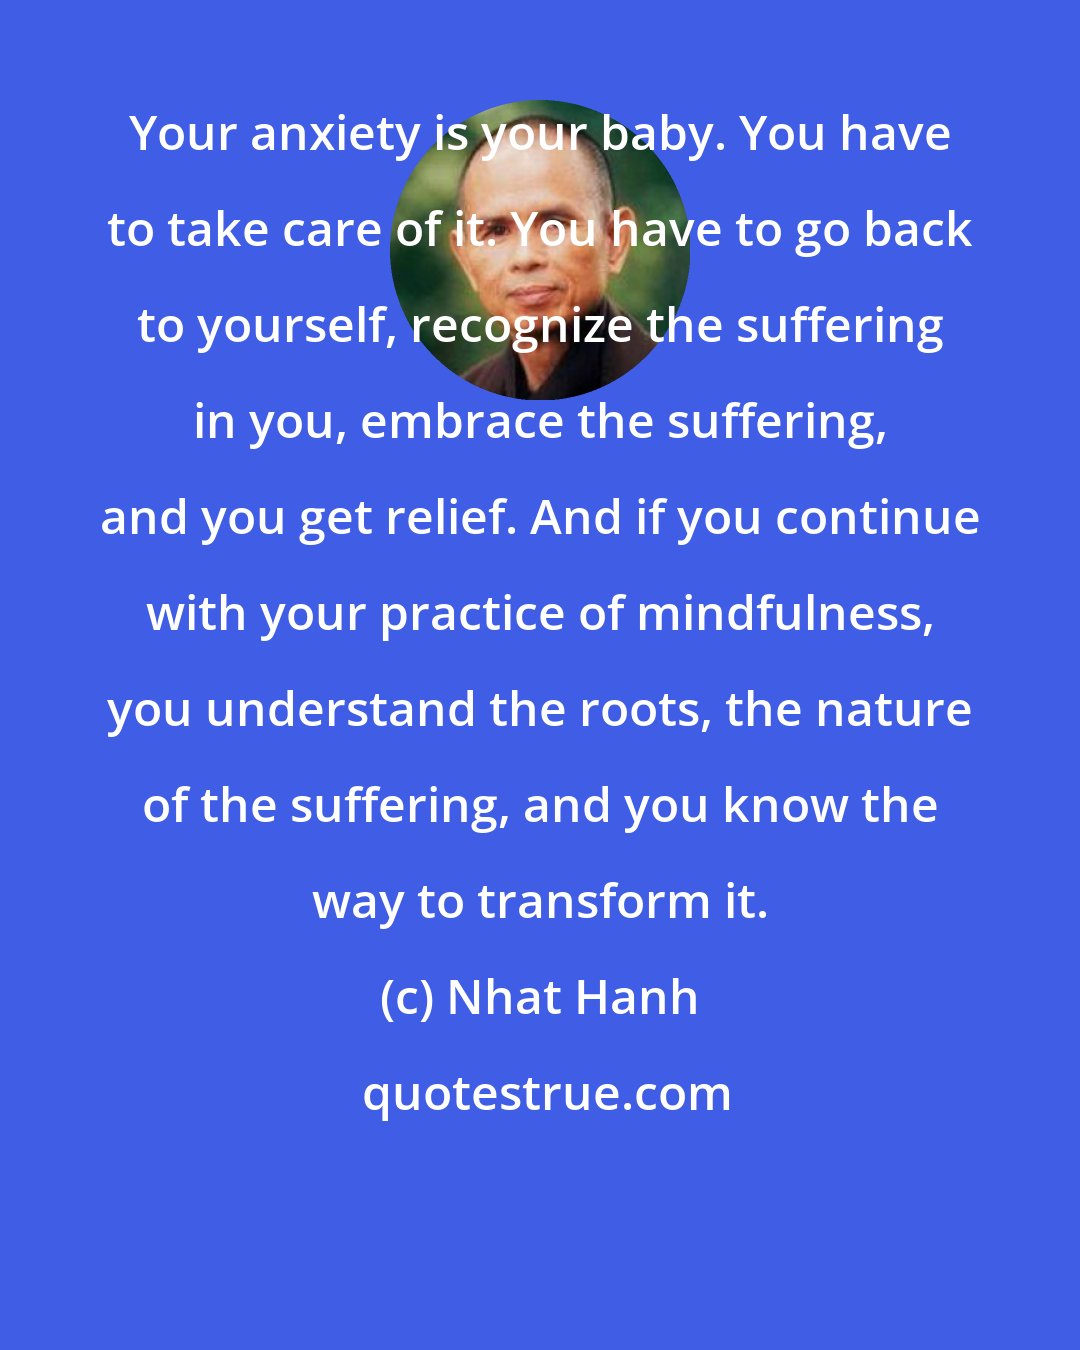 Nhat Hanh: Your anxiety is your baby. You have to take care of it. You have to go back to yourself, recognize the suffering in you, embrace the suffering, and you get relief. And if you continue with your practice of mindfulness, you understand the roots, the nature of the suffering, and you know the way to transform it.